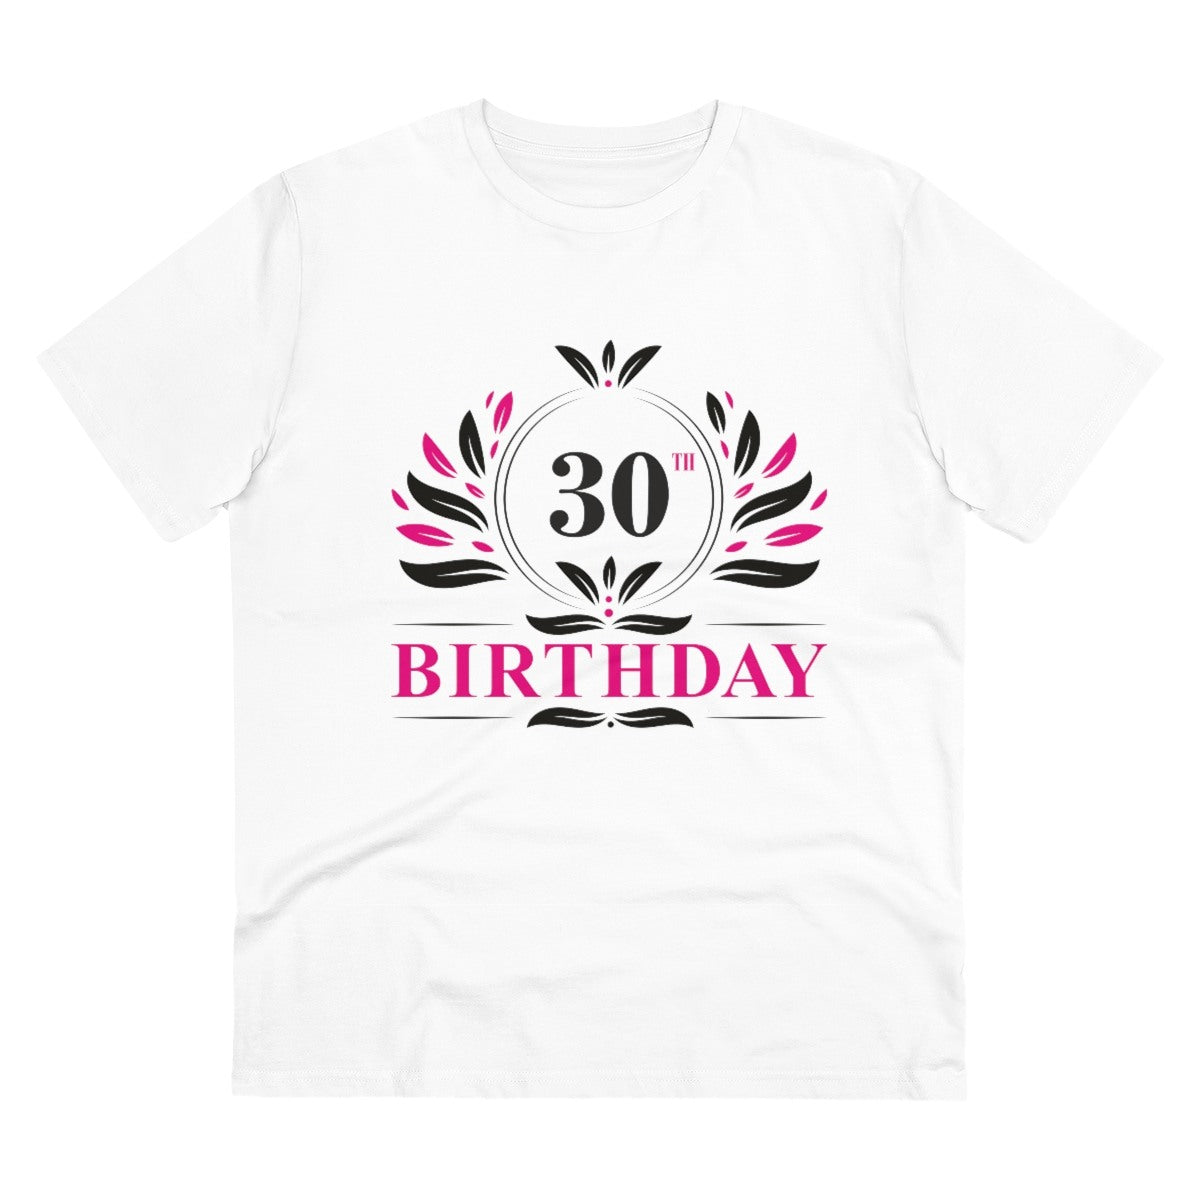 Men's PC Cotton 30th Birthday Printed T Shirt (Color: White, Thread Count: 180GSM) - GillKart